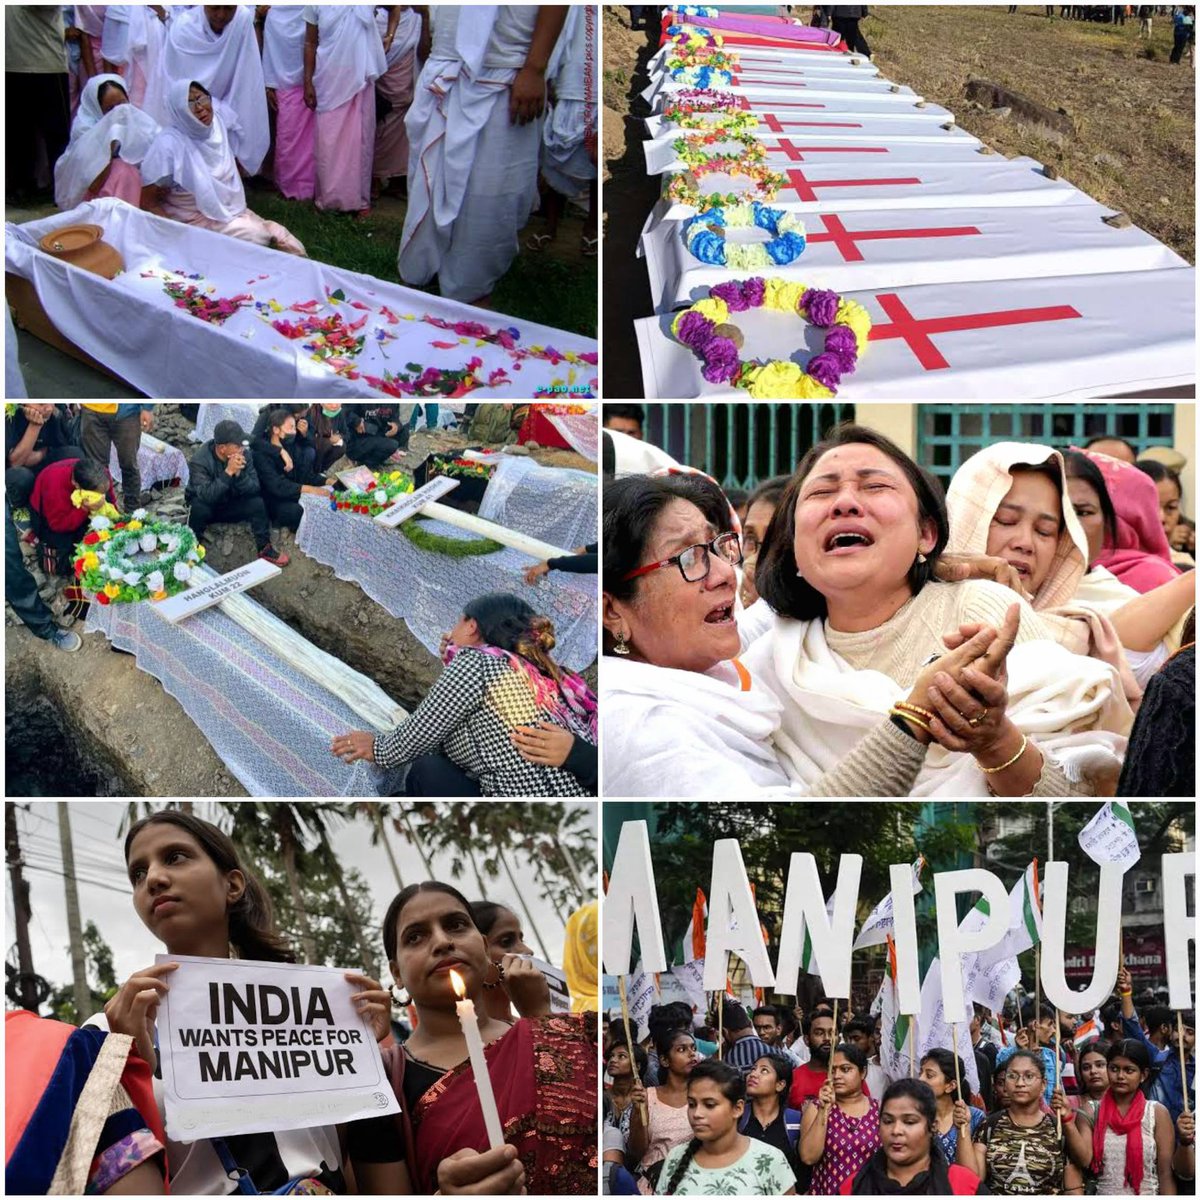 'Day after day this misery must go on

So far away, we wait for the day
For the lives all so wasted and gone
We feel the pain of a lifetime lost in a thousand days
Through the fire and the flames, we carry on'

#Manipur #ManipurViolence #Meitei #Kuki #PeaceNotWar #PeaceAndLove